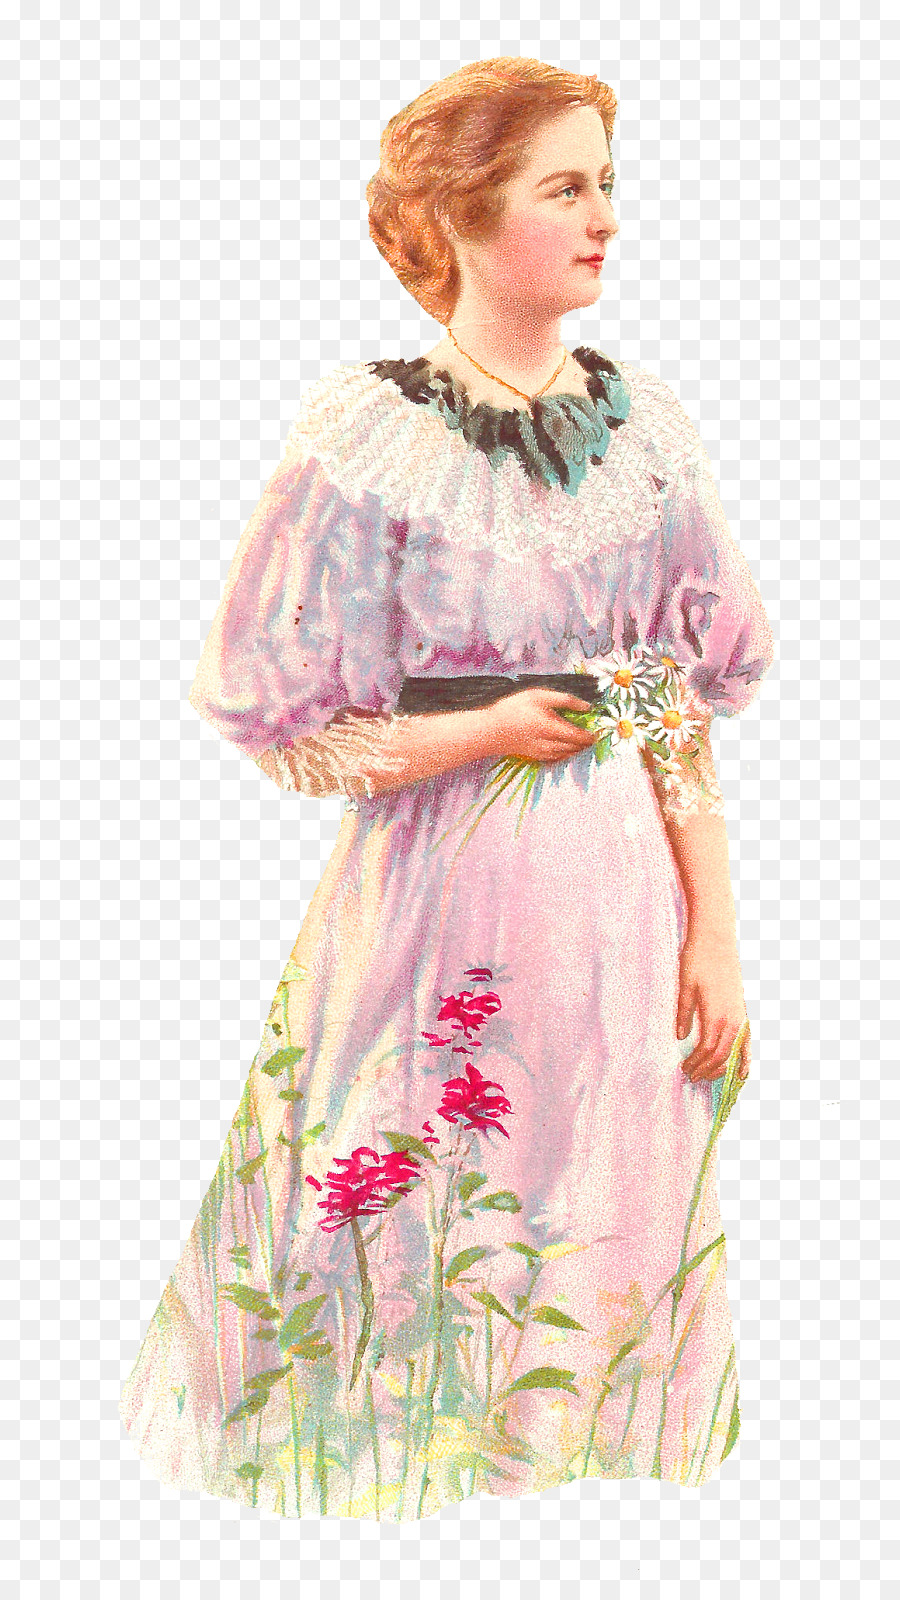 Northanger Abbey Vintage clothing Clip art - woman watercolor png download - 794*1600 - Free Transparent Northanger Abbey png Download.